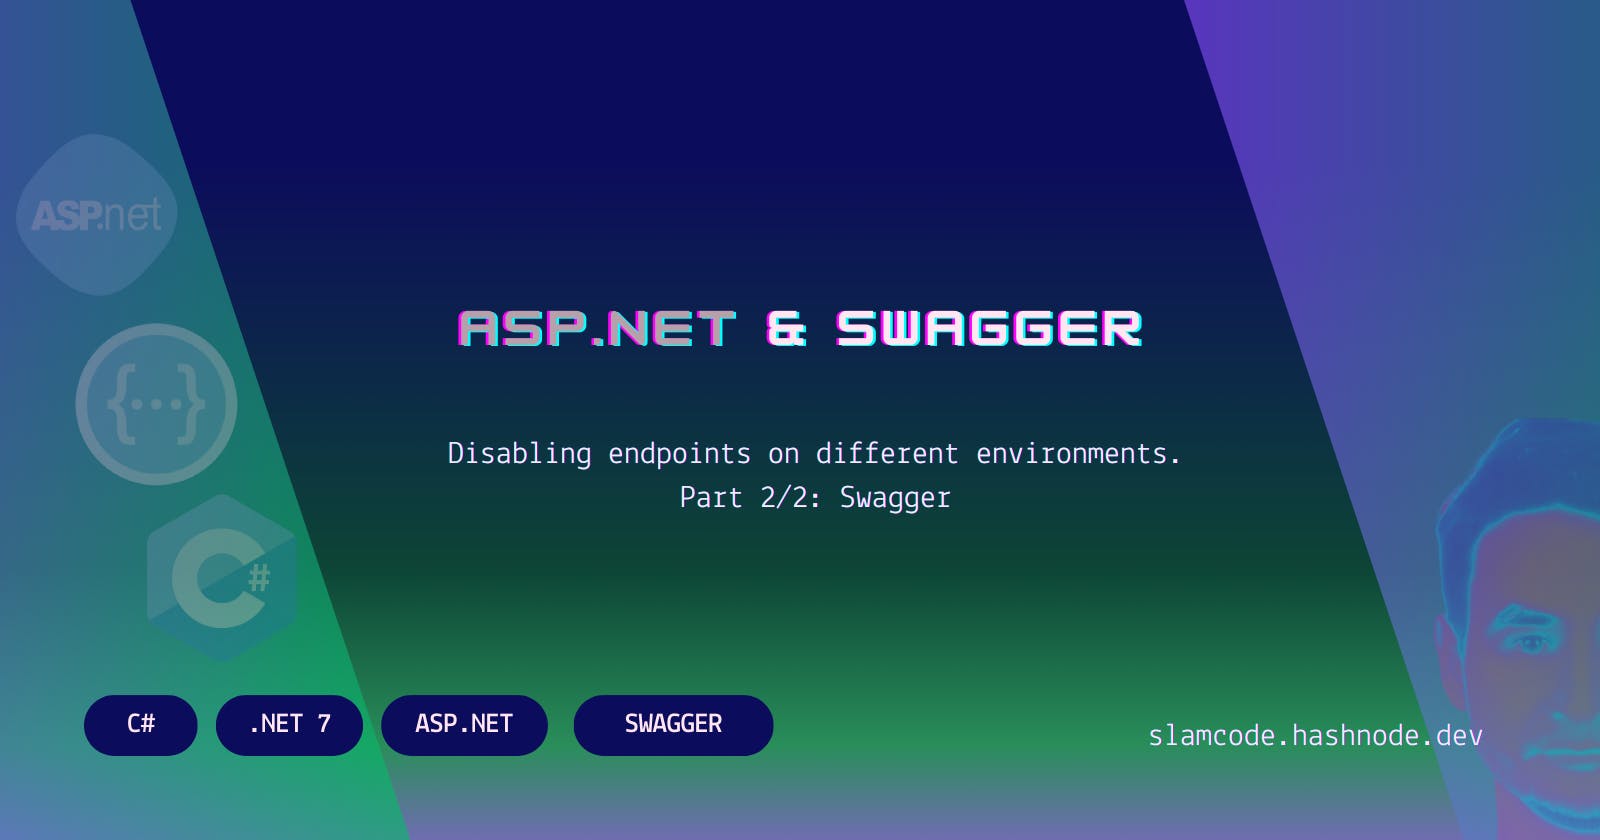 Disabling endpoints on different environments (2/2: Swagger)